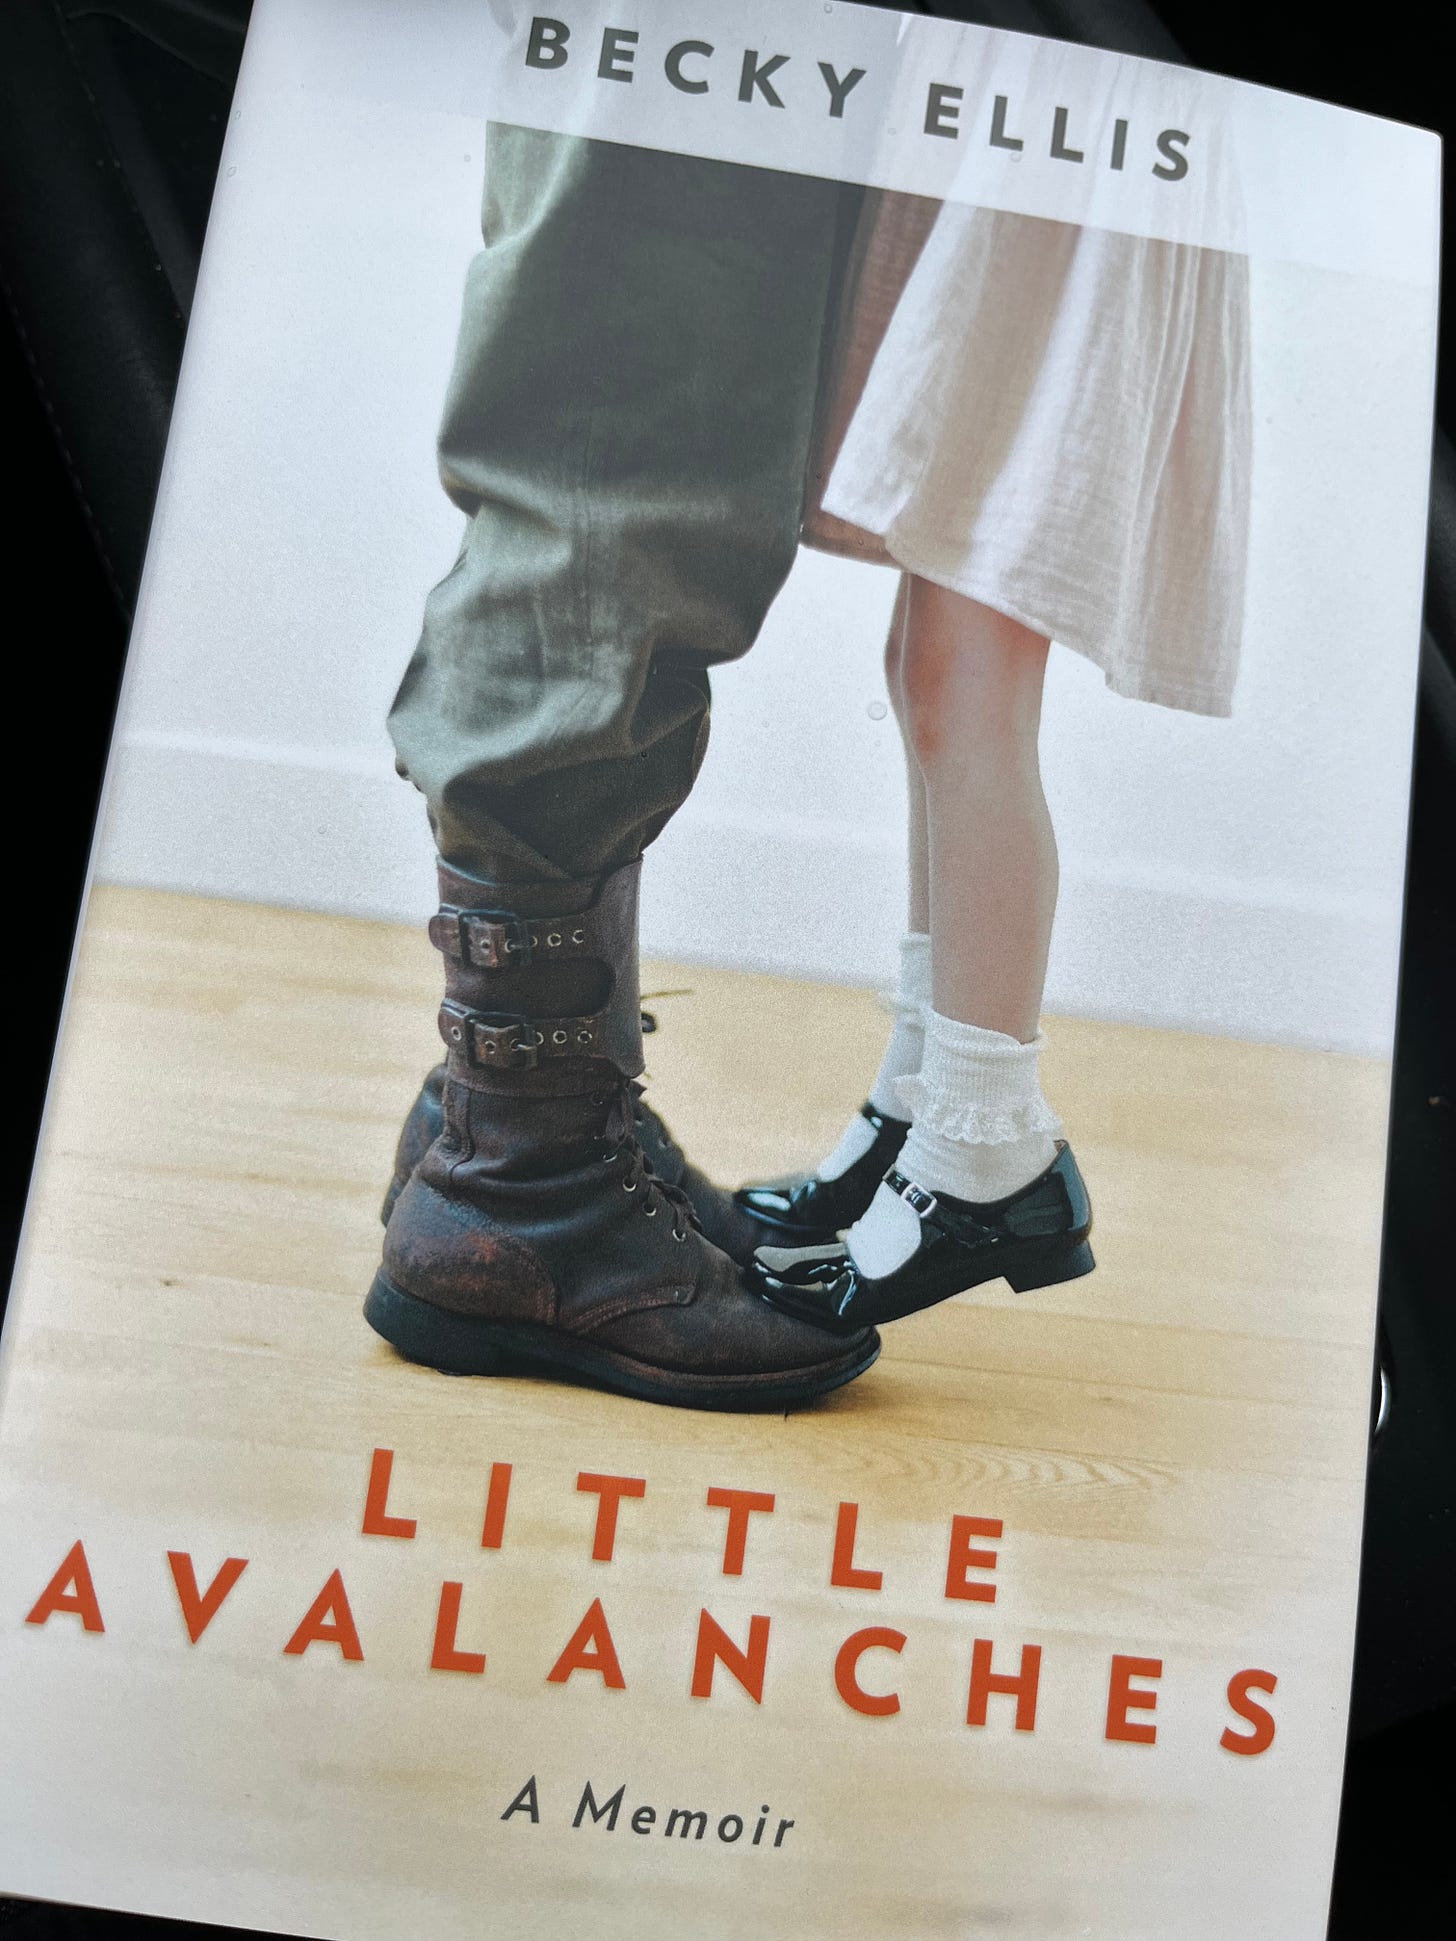 Image of two people from knee down  Man in military pants/boots. Child in dress, short socks and patent leather Mary Jane style shoes and title of memoir Little Avalances by Becky Ellis 